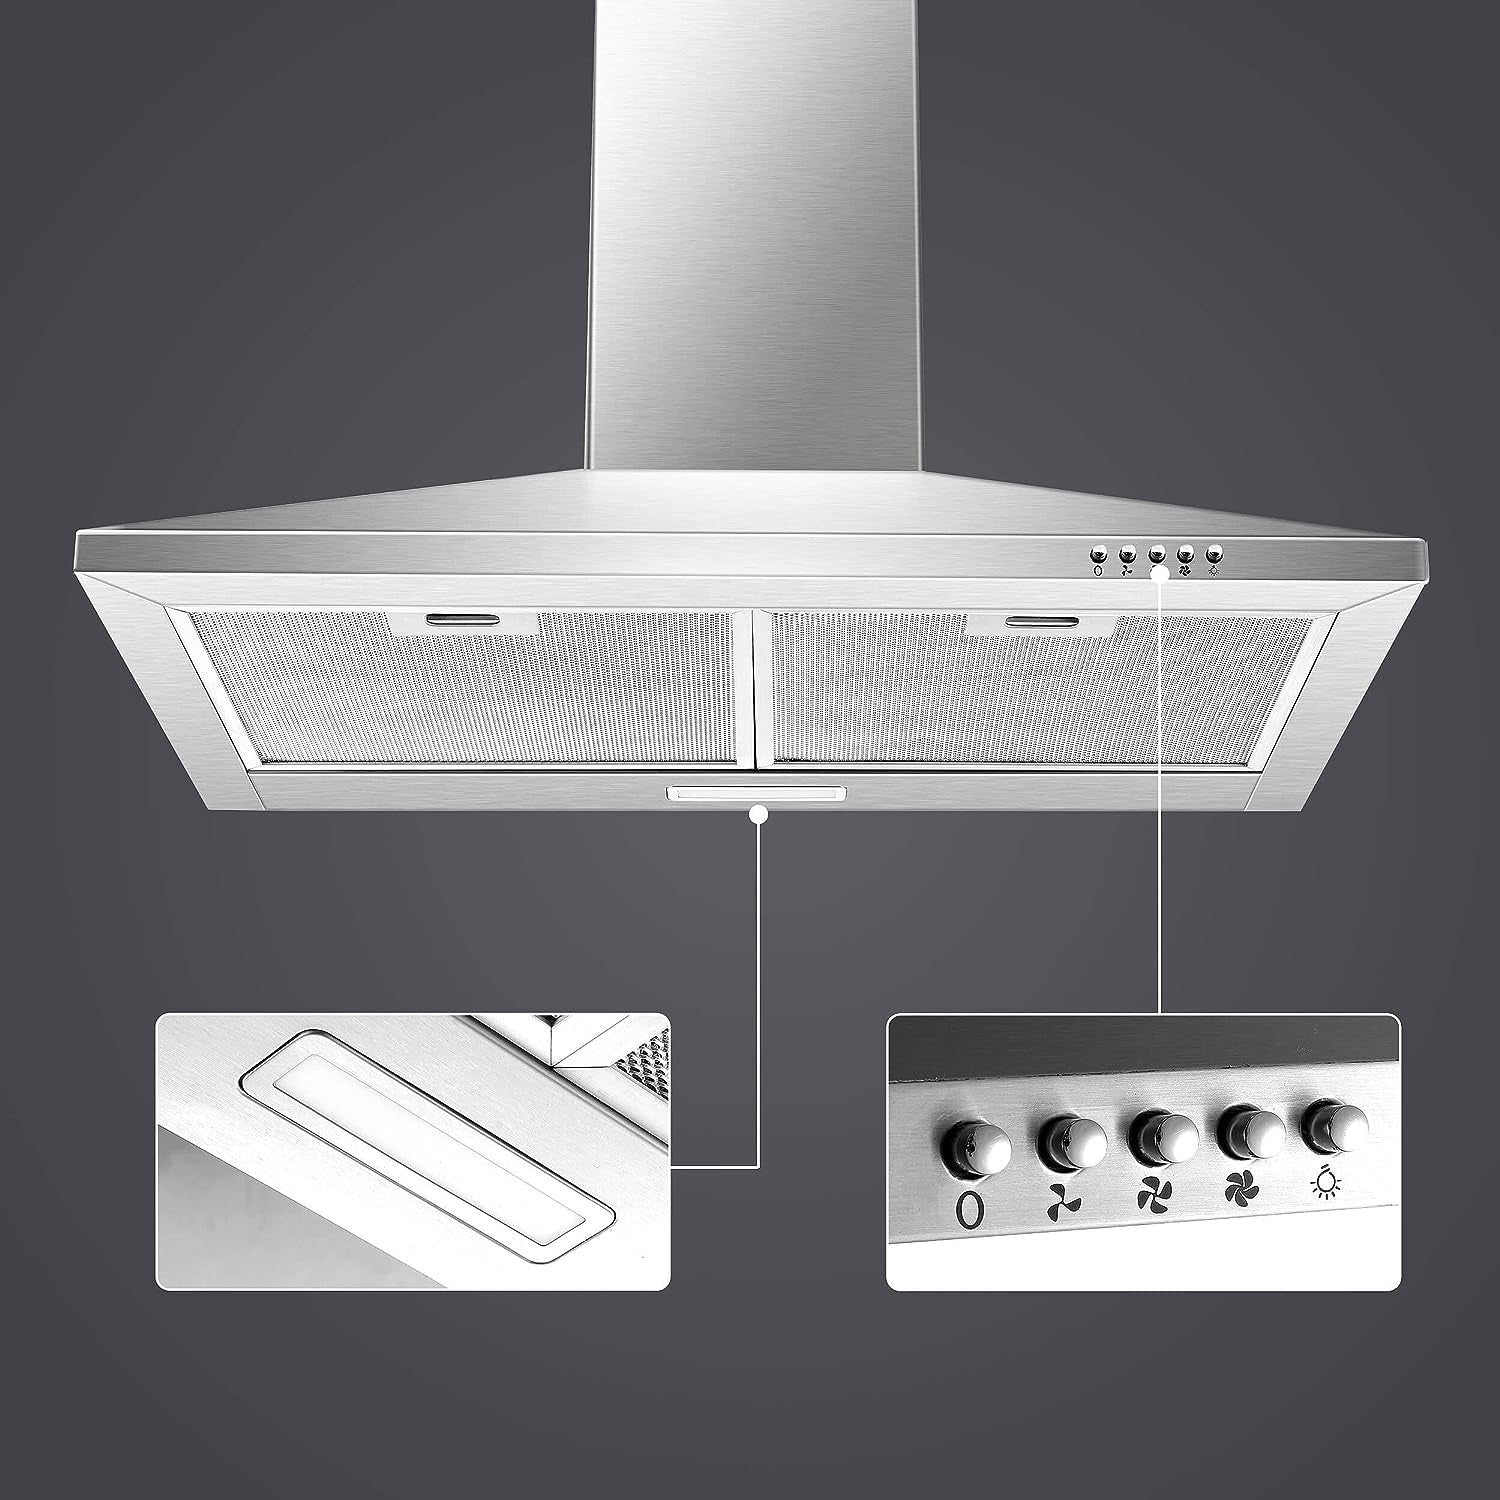 Tieasy 30 Inch Wall Mount 450 CFM Range Hood US1001G75A LED and push button